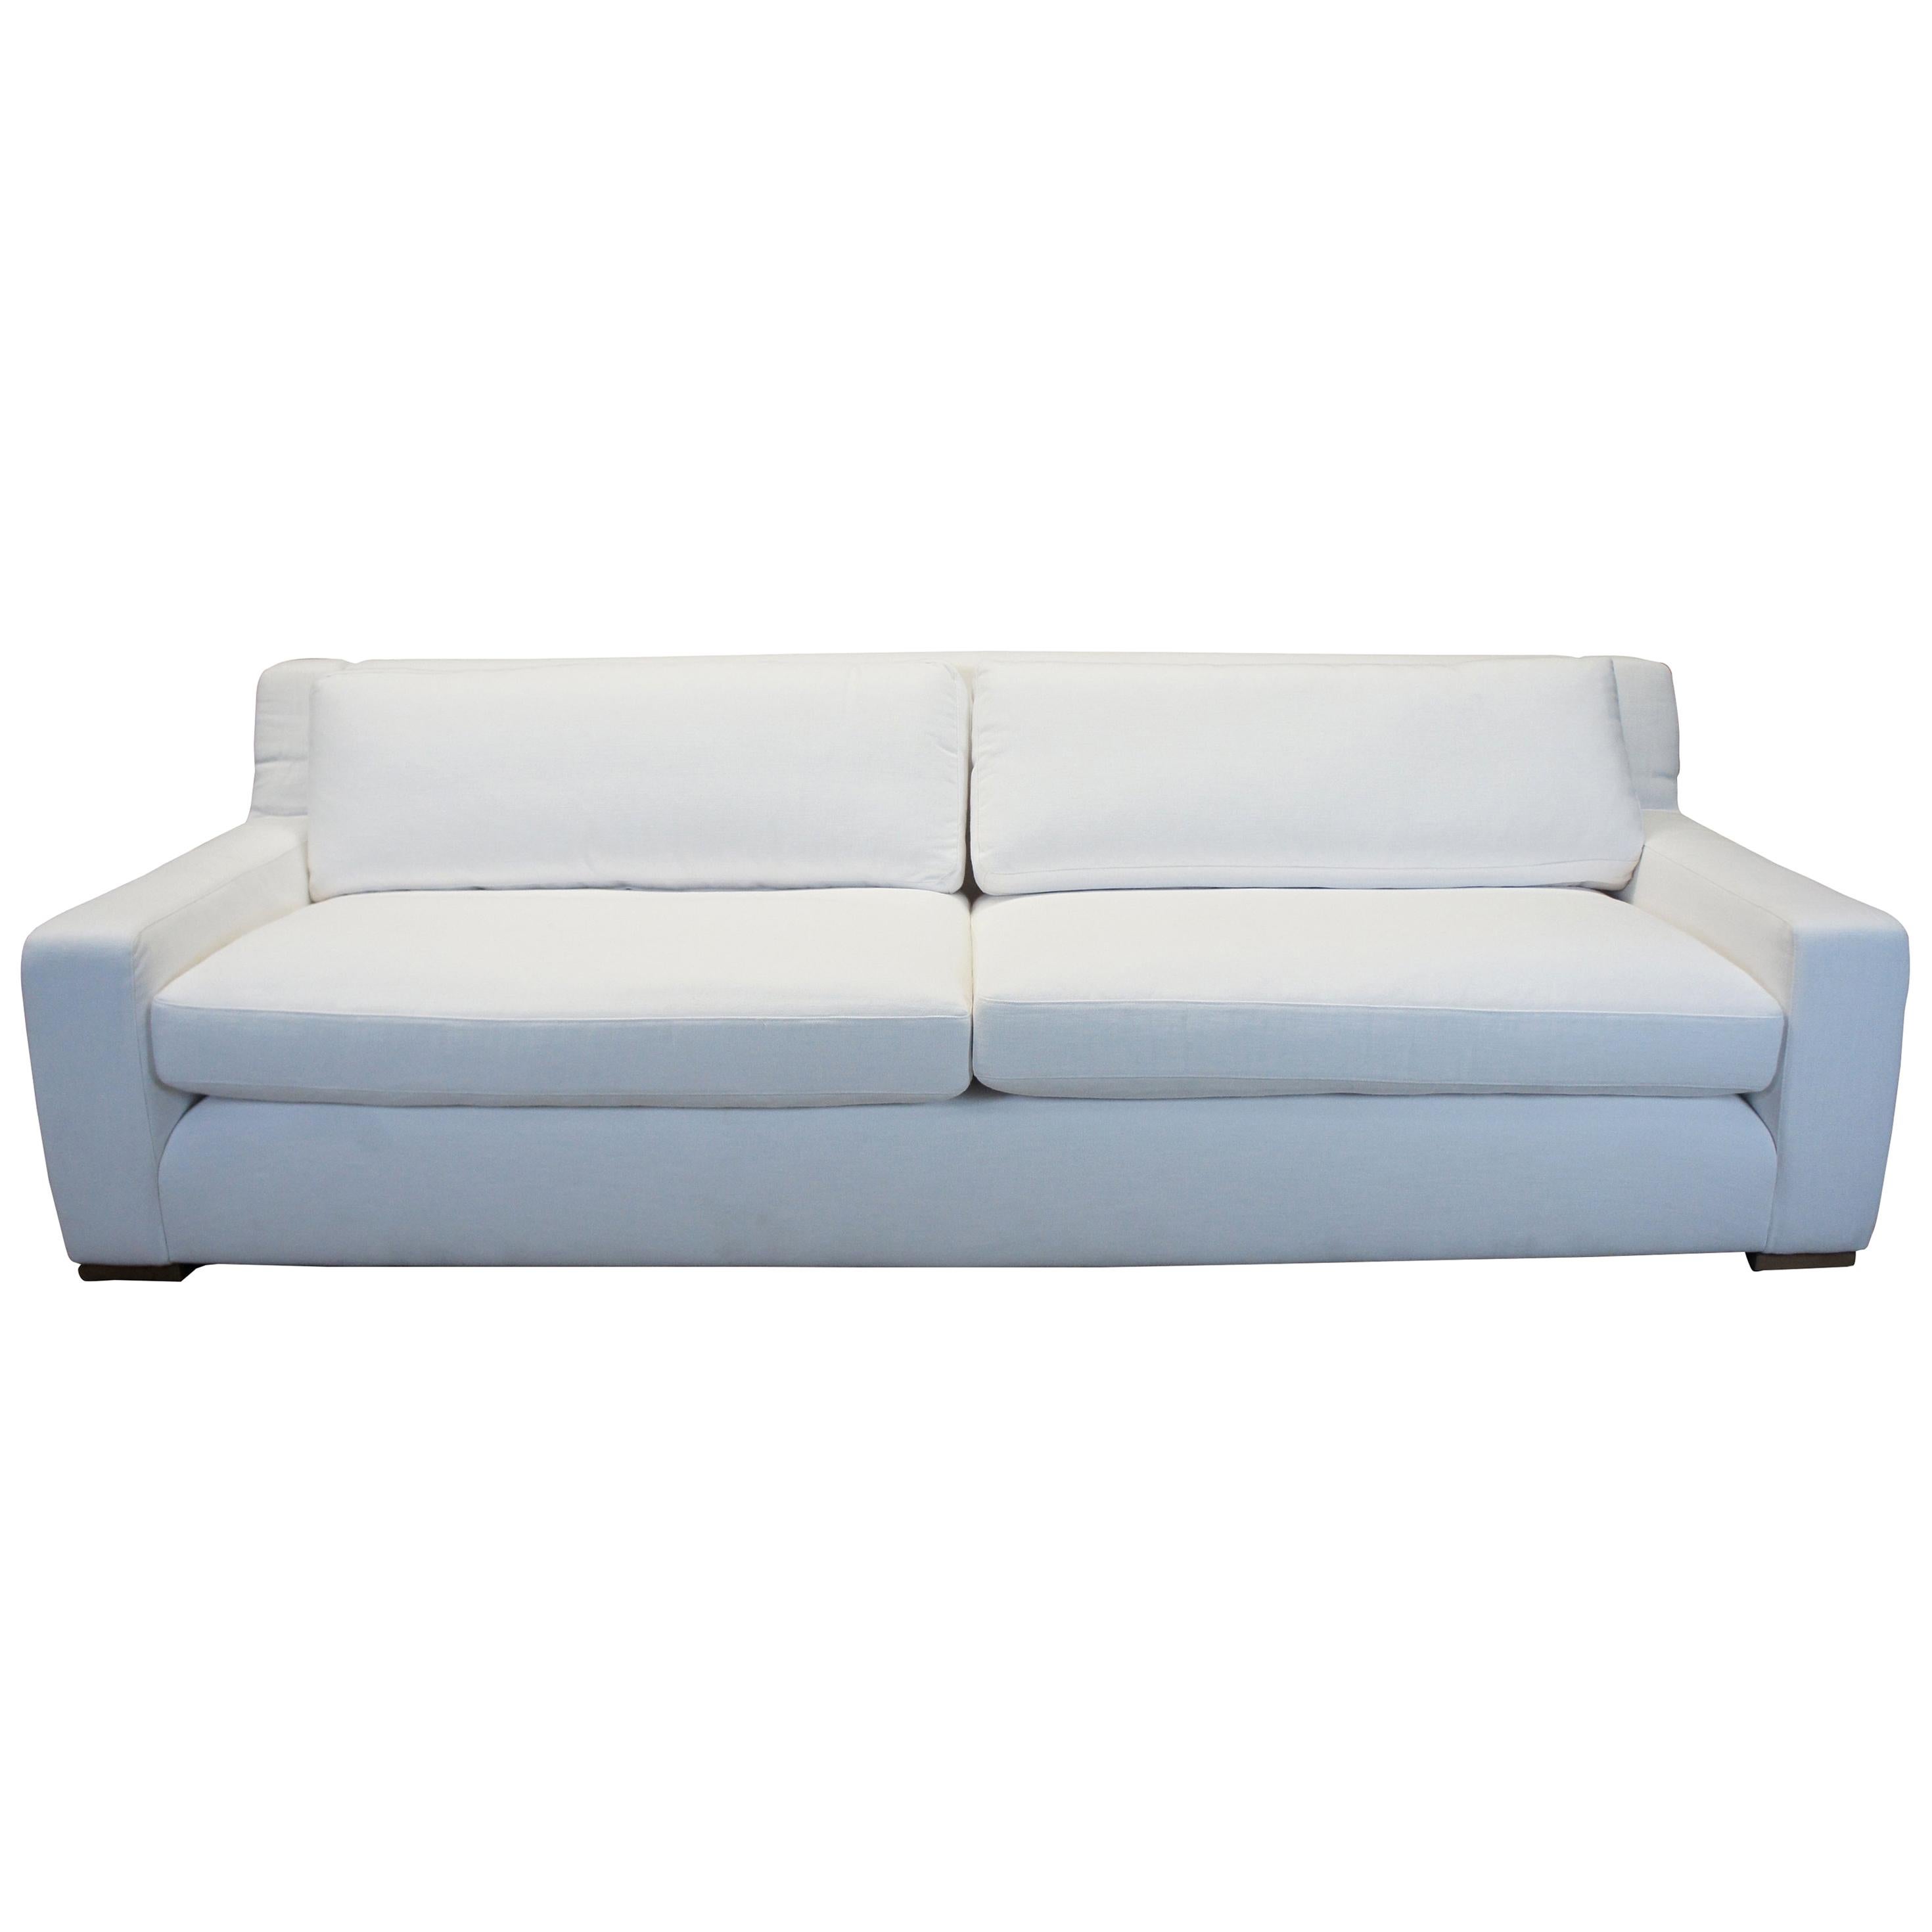 Restoration Hardware Parisian Linen Upholstered Track Arm Sofa Couch